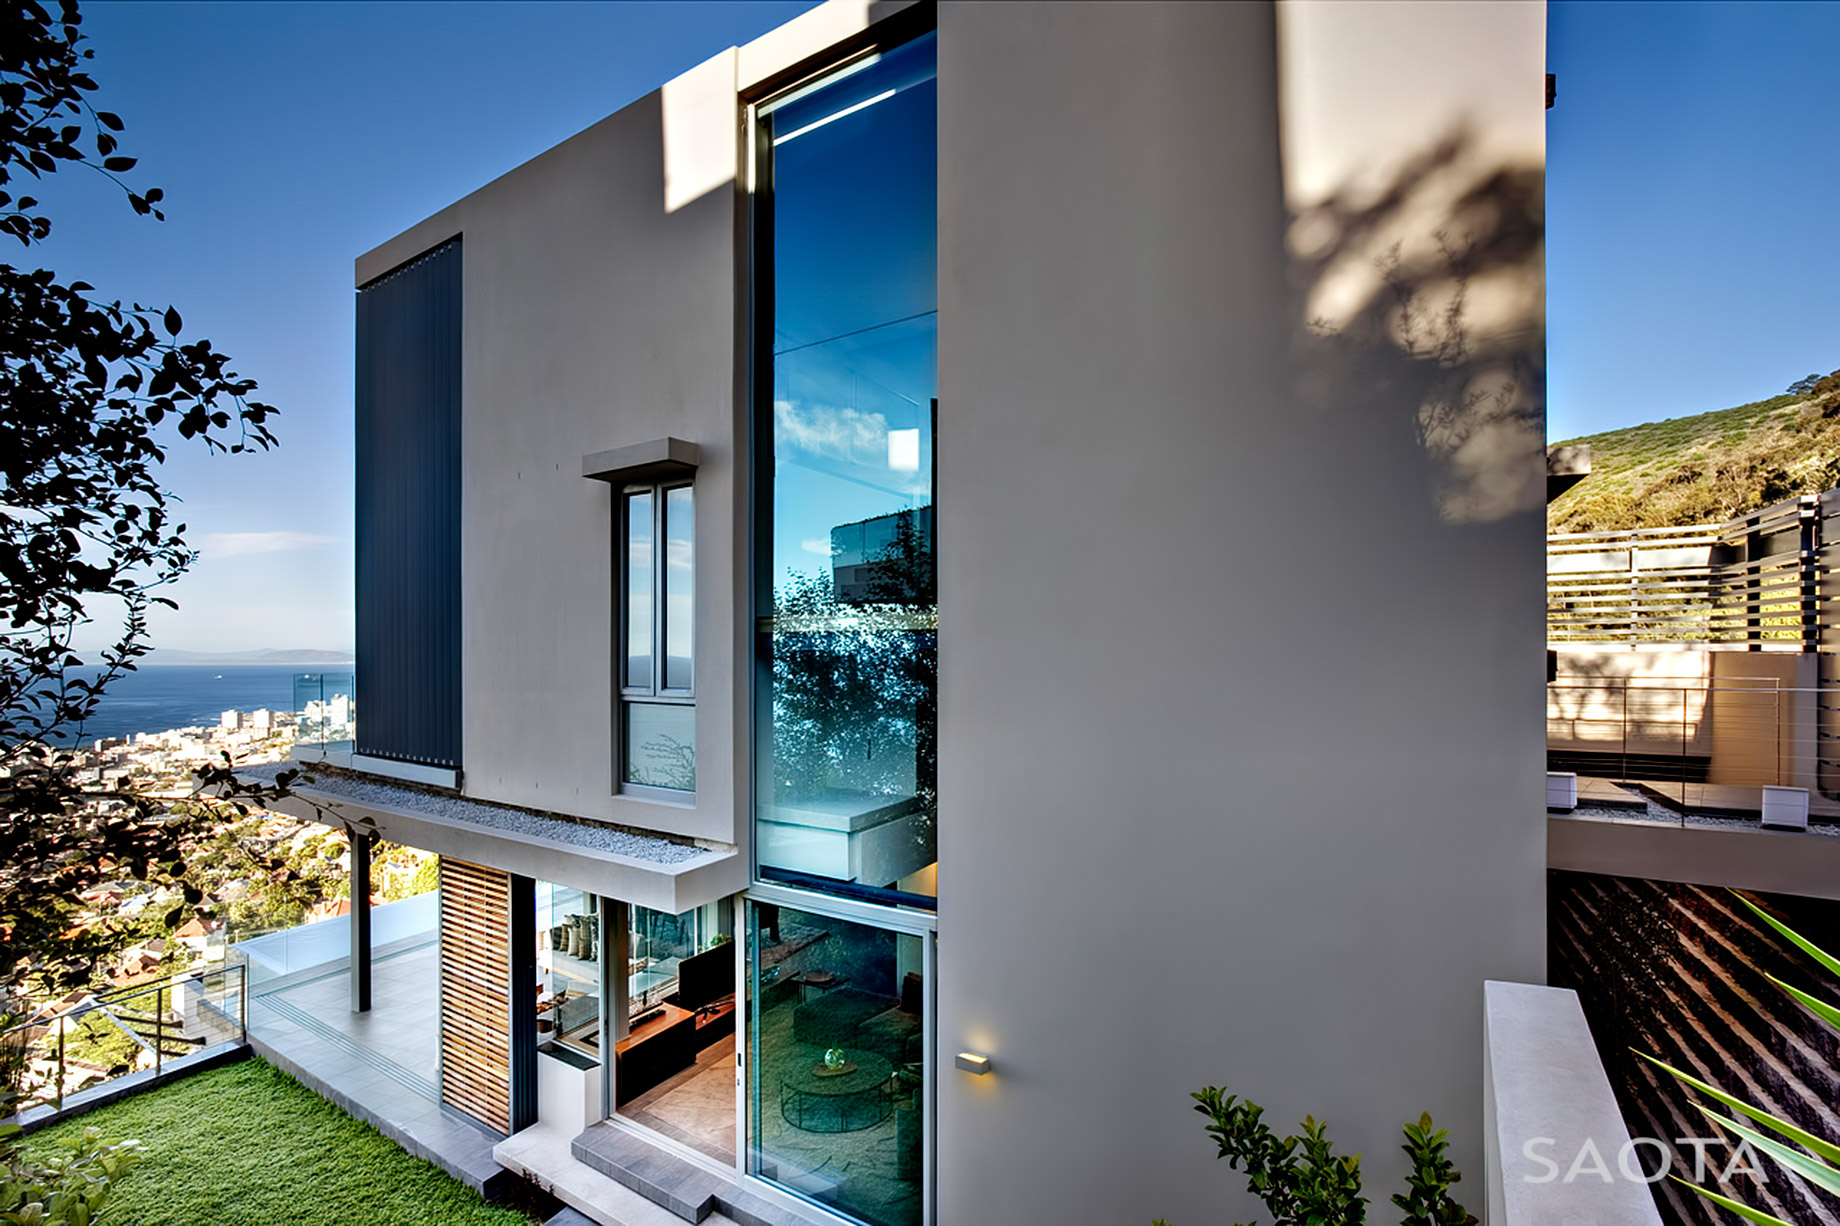 Head Road 1816 – Fresnaye, Cape Town, Western Cape, South Africa